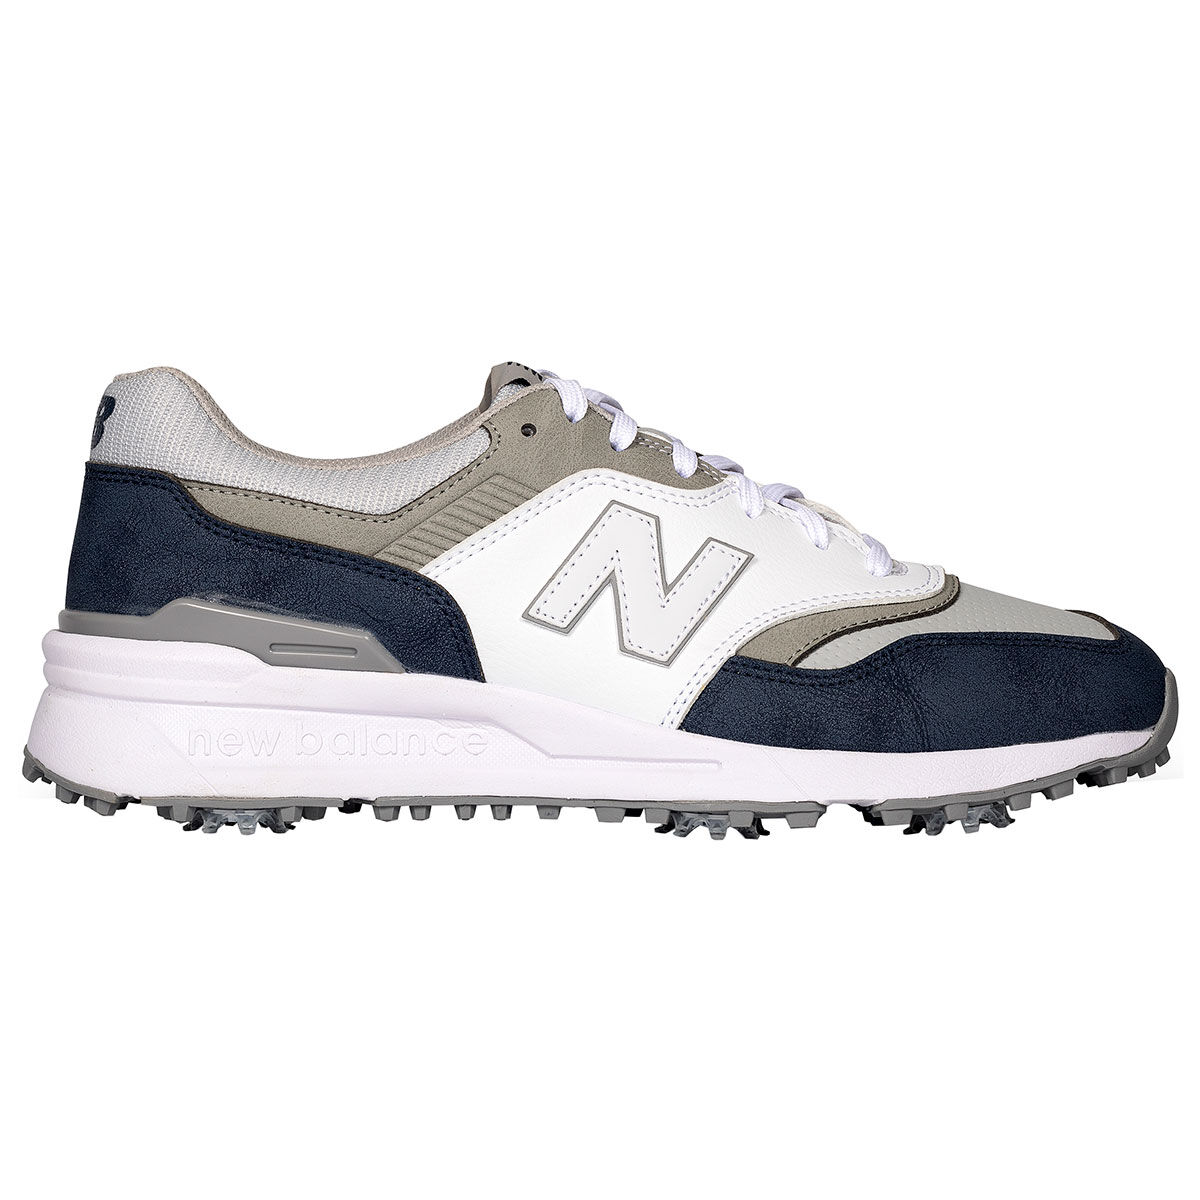 New Balance Men’s 997 Waterproof Spiked Golf Shoes, Mens, Navy/white, 8 | American Golf